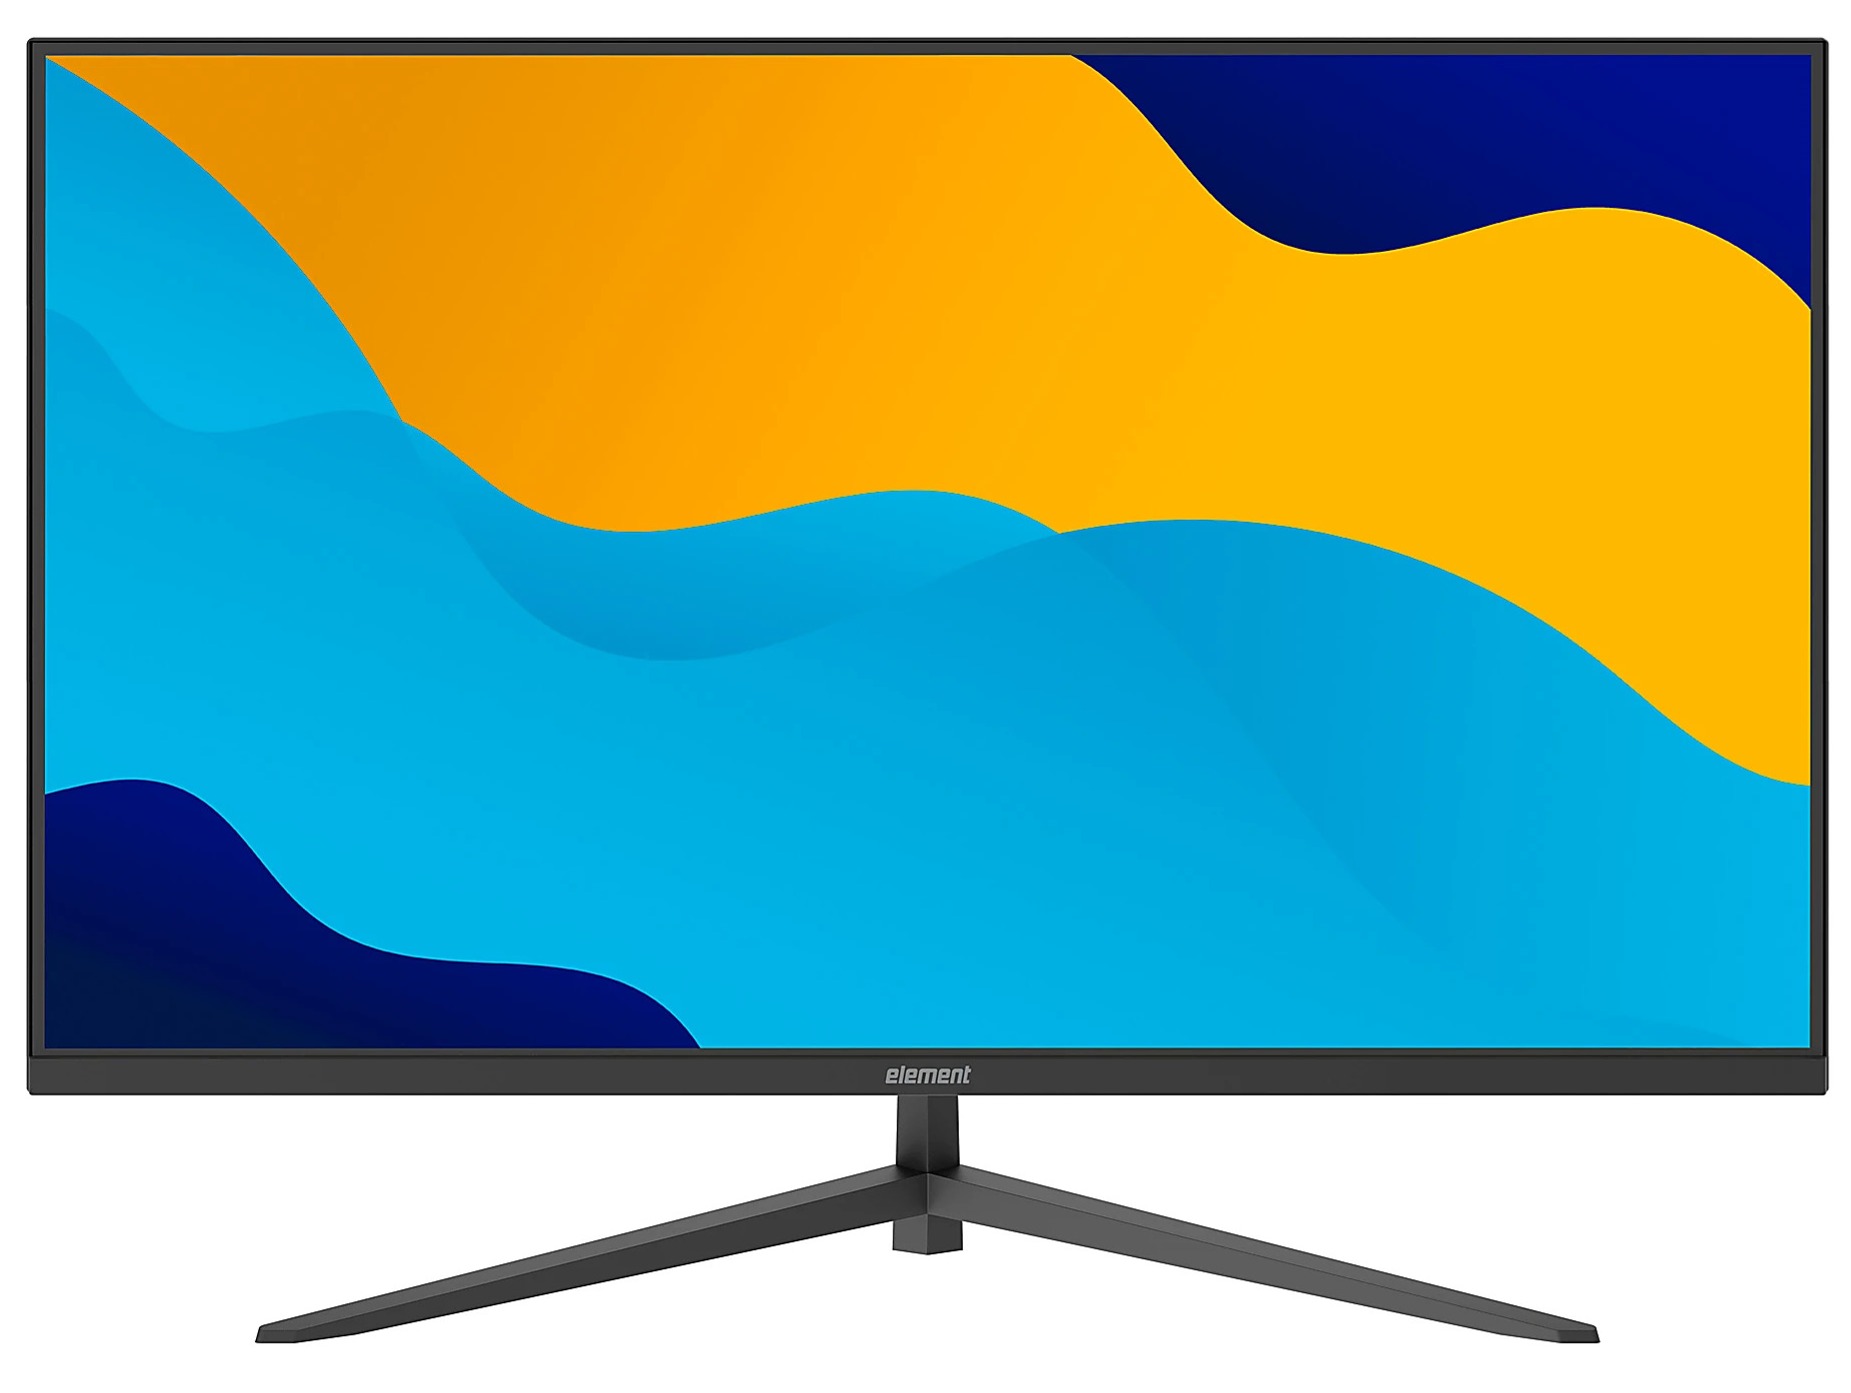 32" Element 1440P QHD 75Hz IPS Monitor w/ 65W Power Delivery + $25 Gas Gift Card $140 + Free Shipping